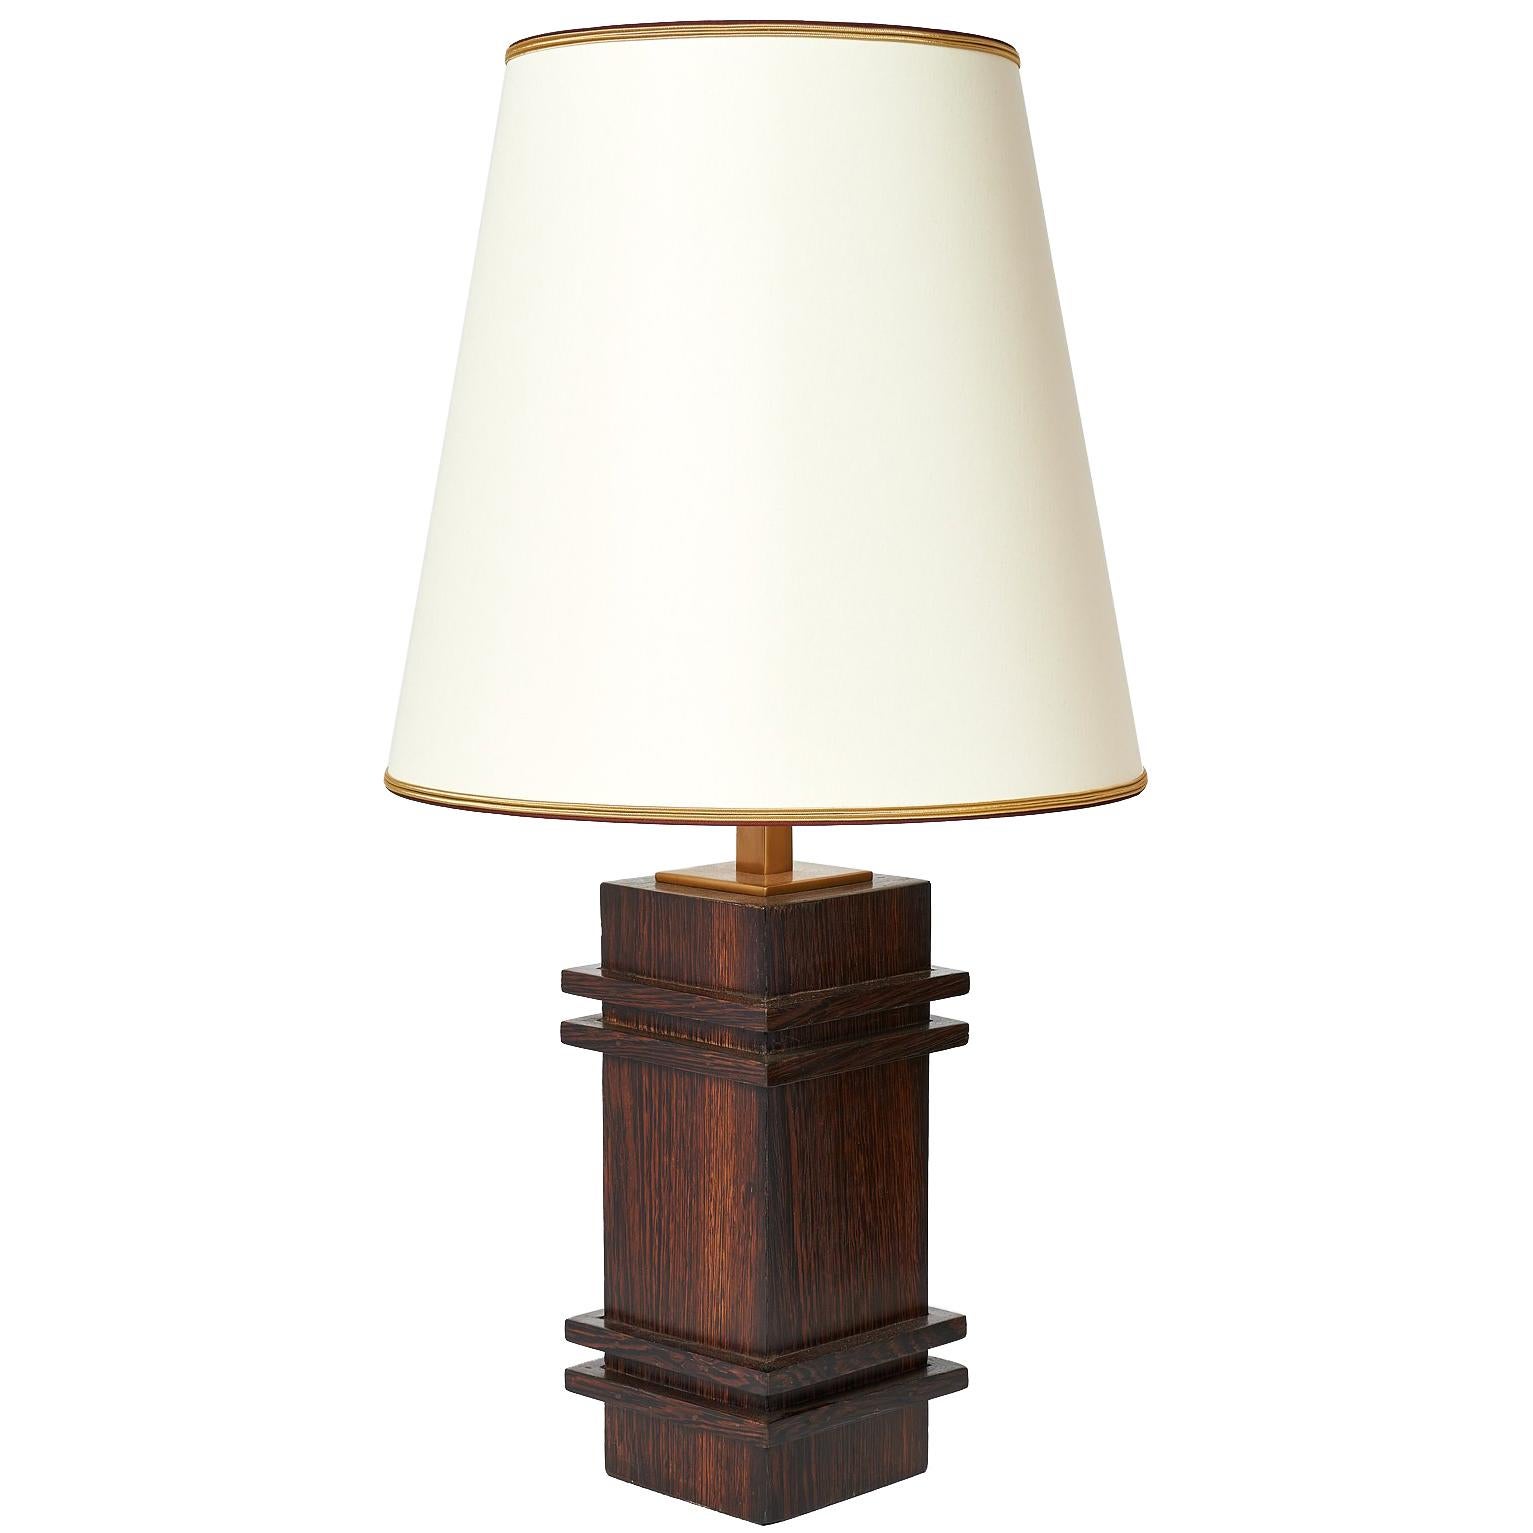 Palmwood Table Lamp att. to Jacques Adnet, 1950s